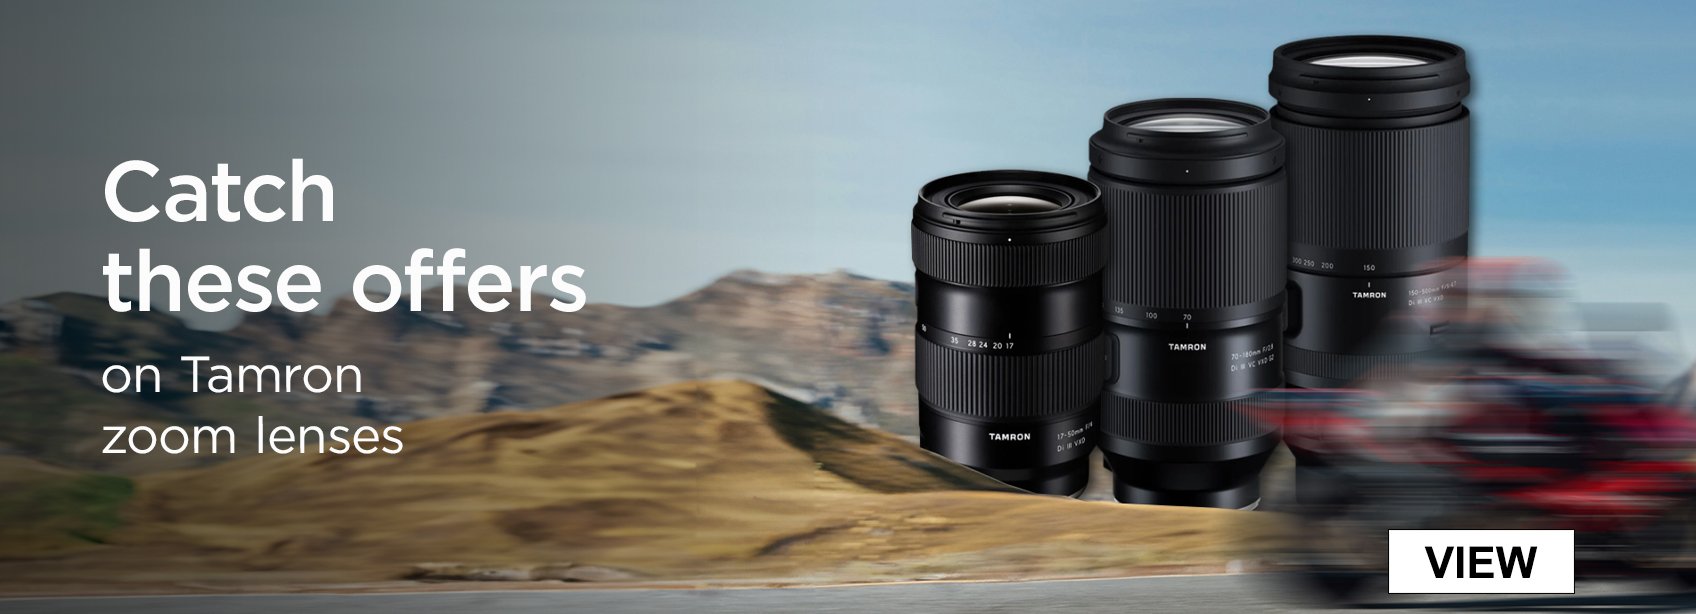 Catch these offers on Tamron zoom lenses